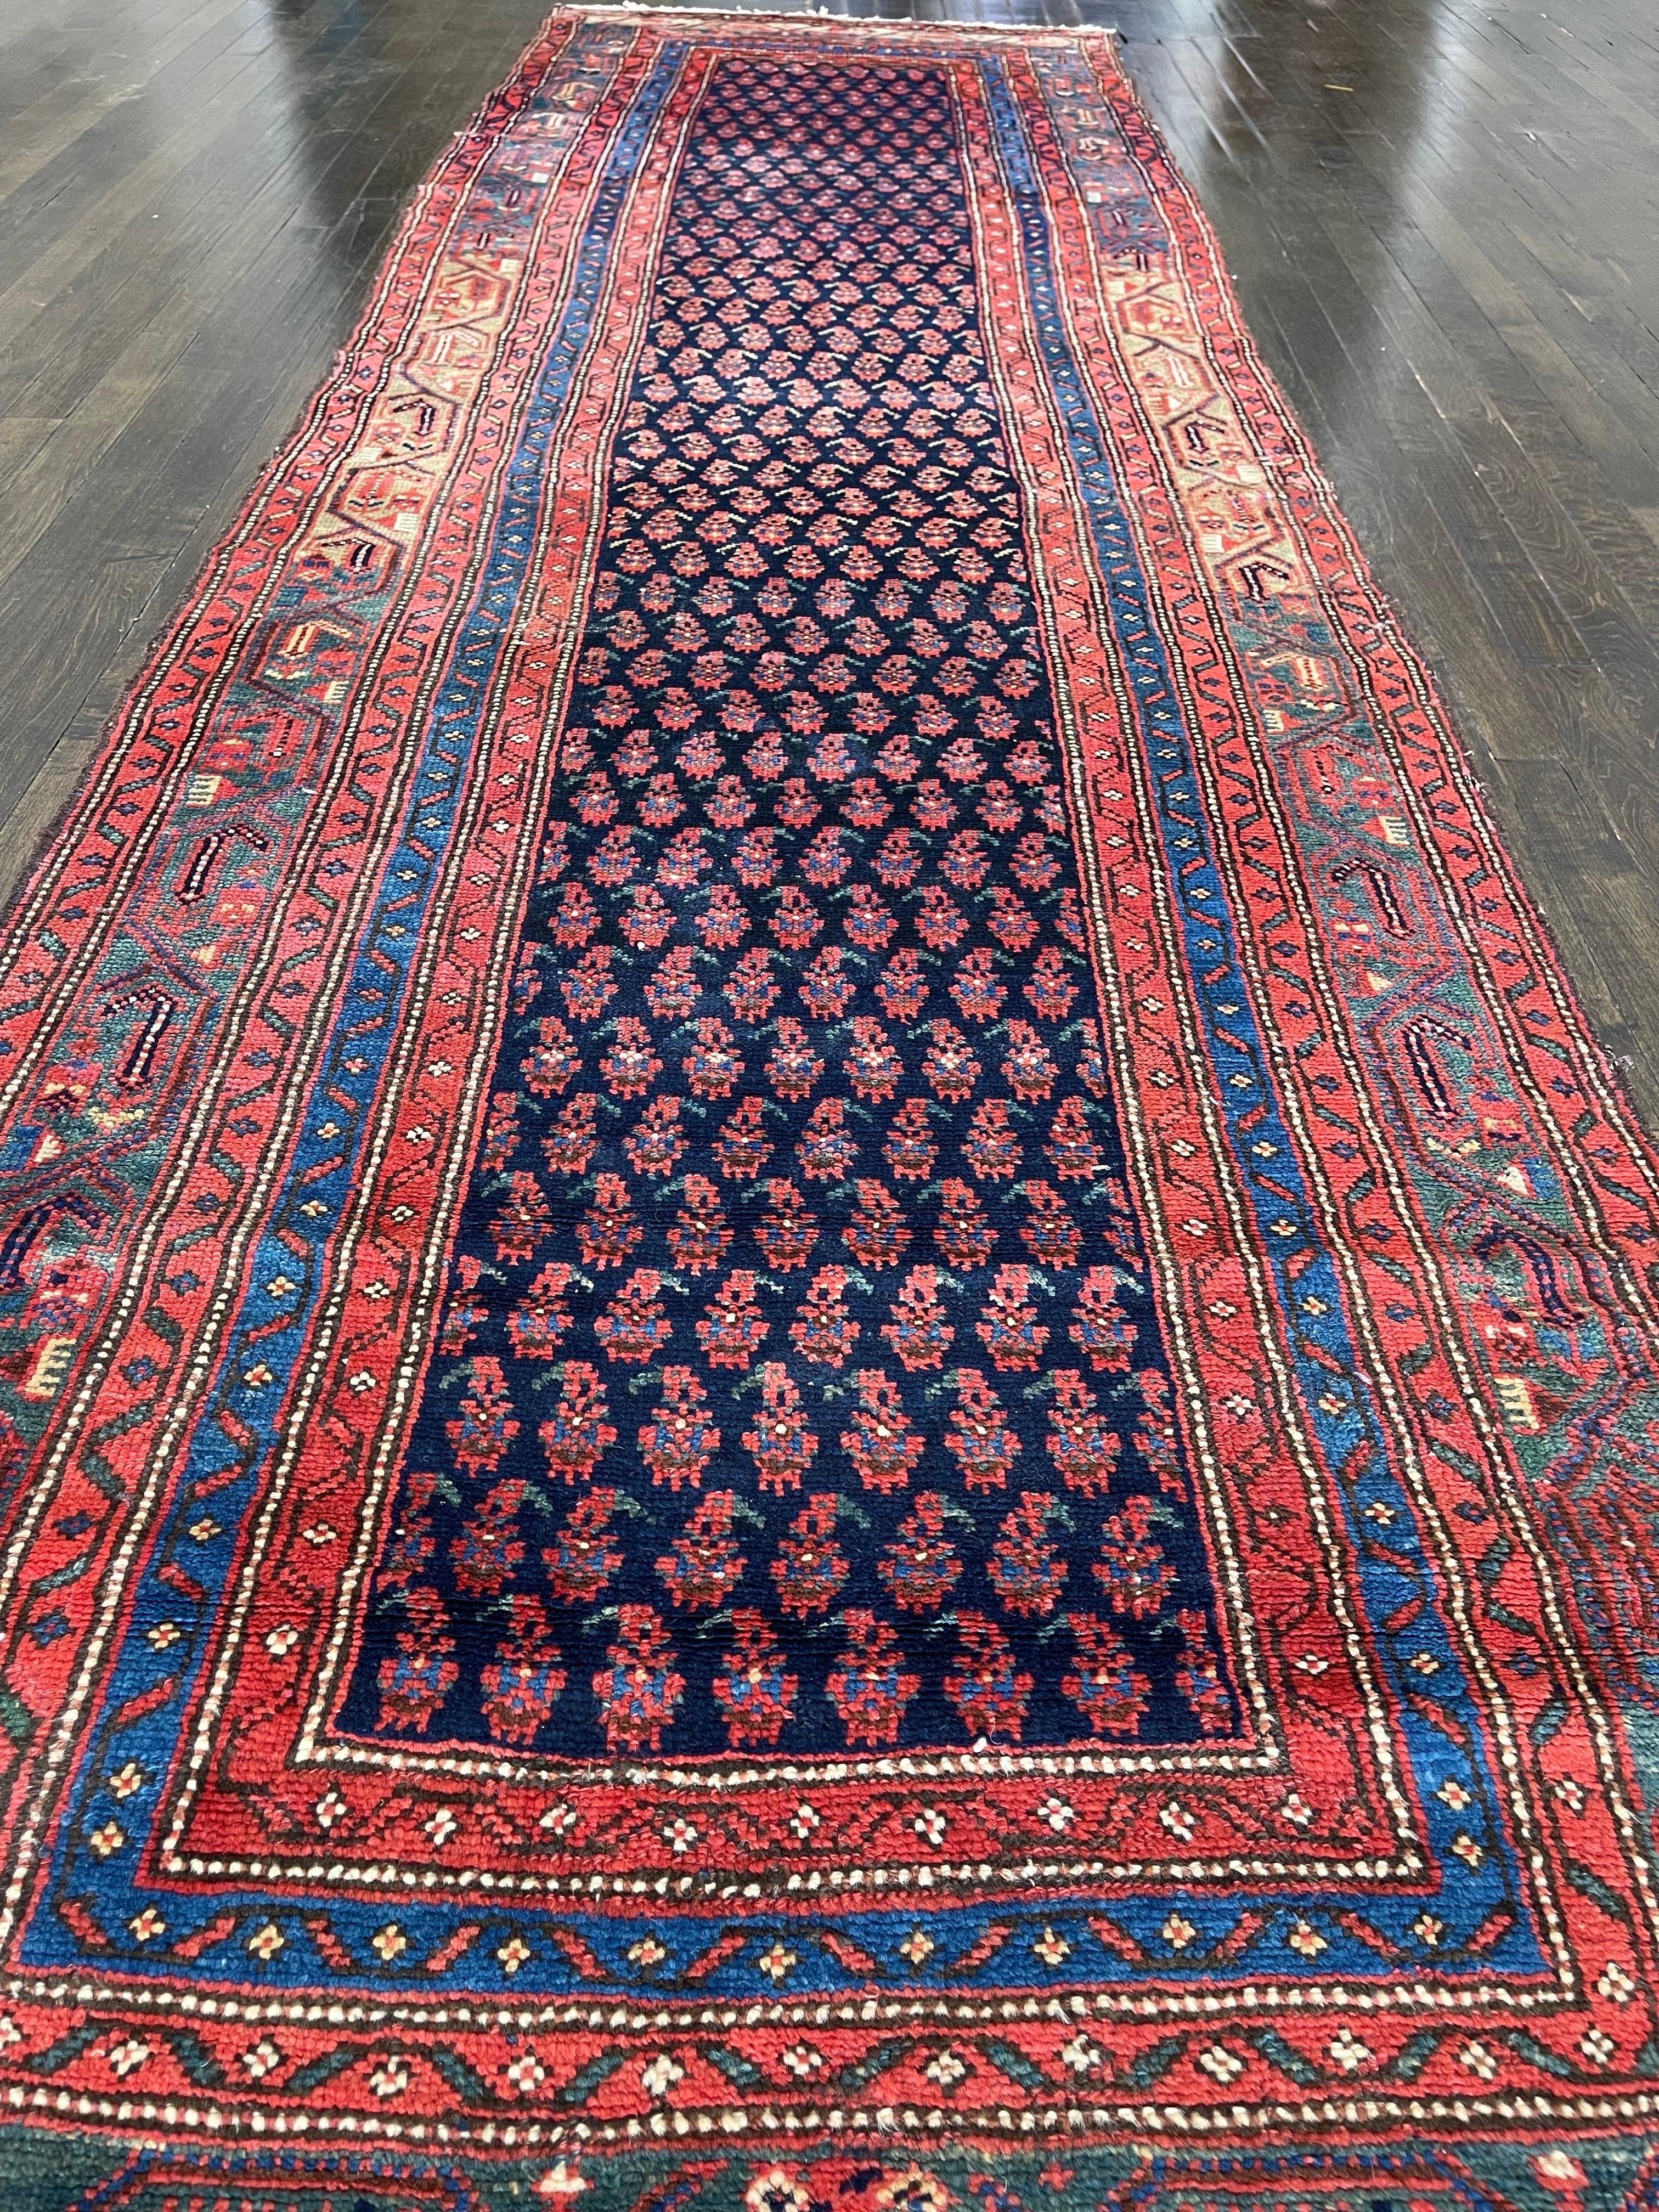 A handsome dark blue runner hand woven in north western Iran.Featuring elegantly curved boteh that are simply drawn; complexities are ruled out by the difficult ikat technique. The pattern comes alive through the contrast of red/maroon with the dark